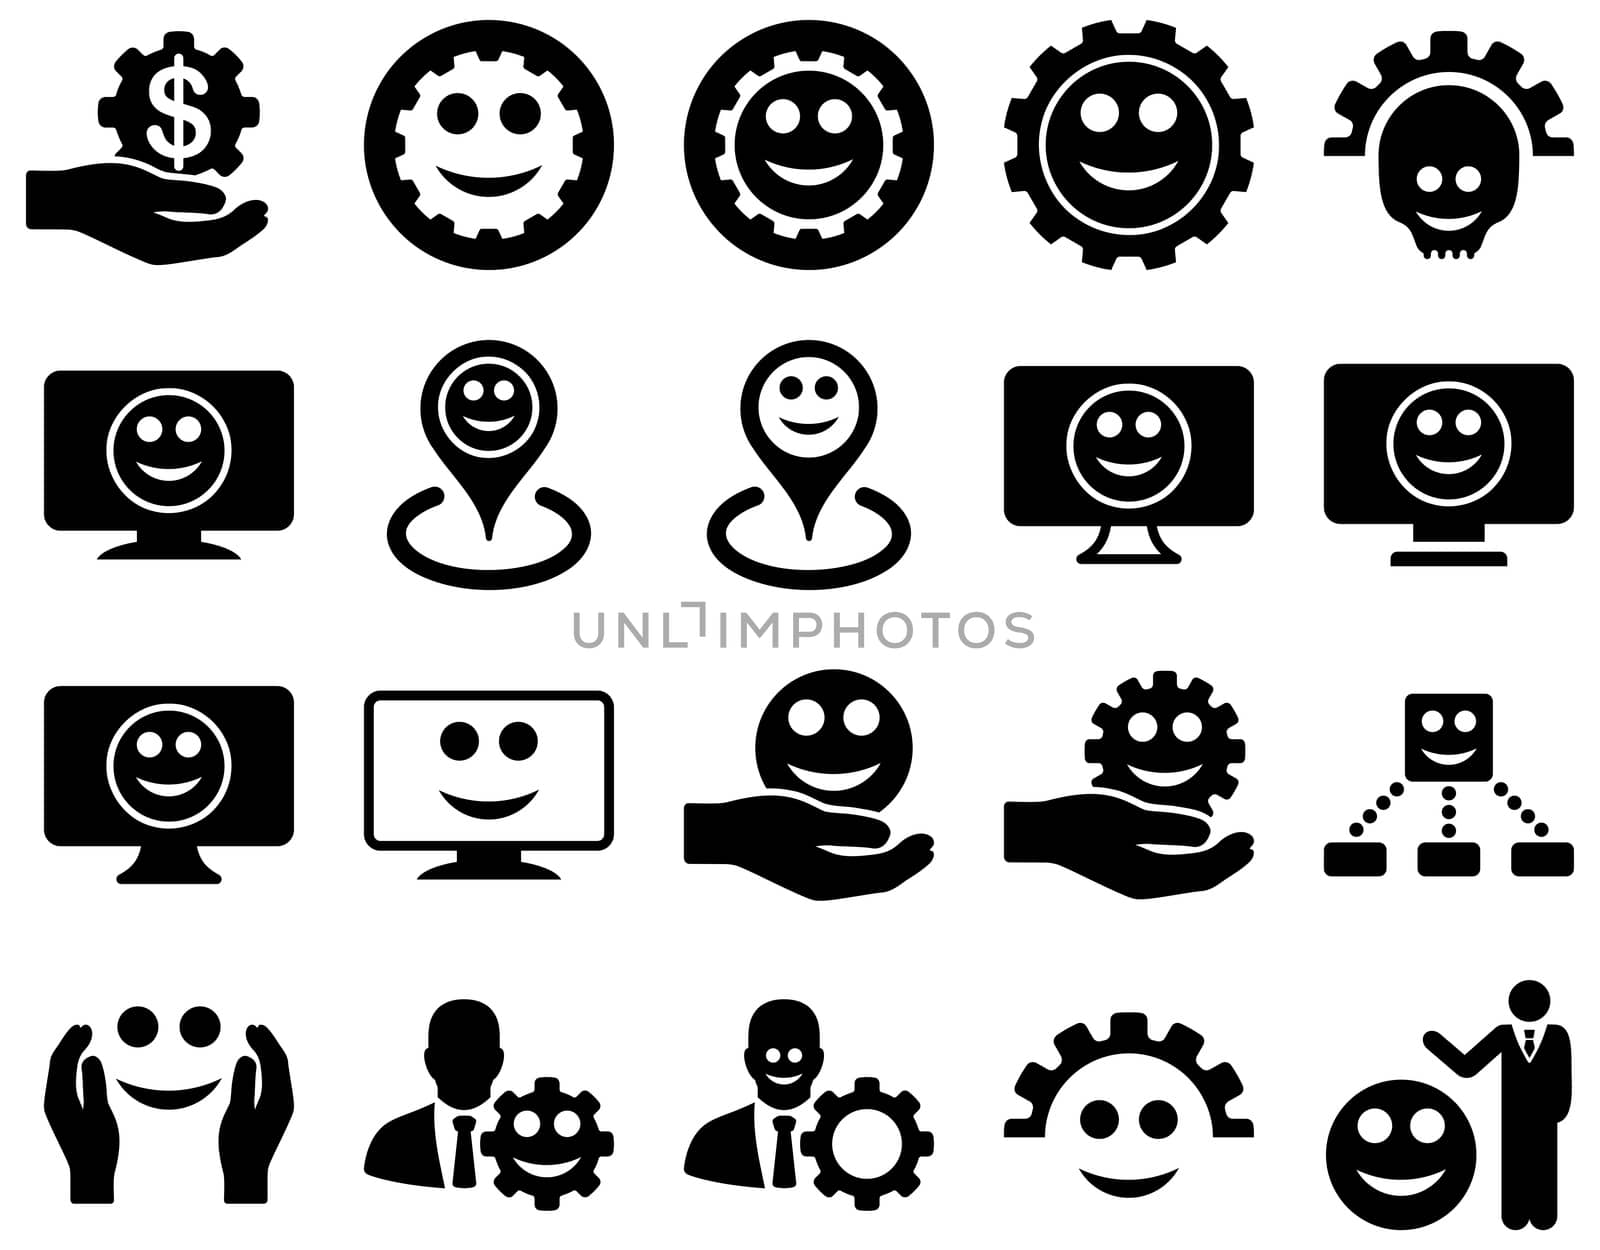 Tools, gears, smiles, map markers icons. Glyph set style is flat images, black symbols, isolated on a white background.